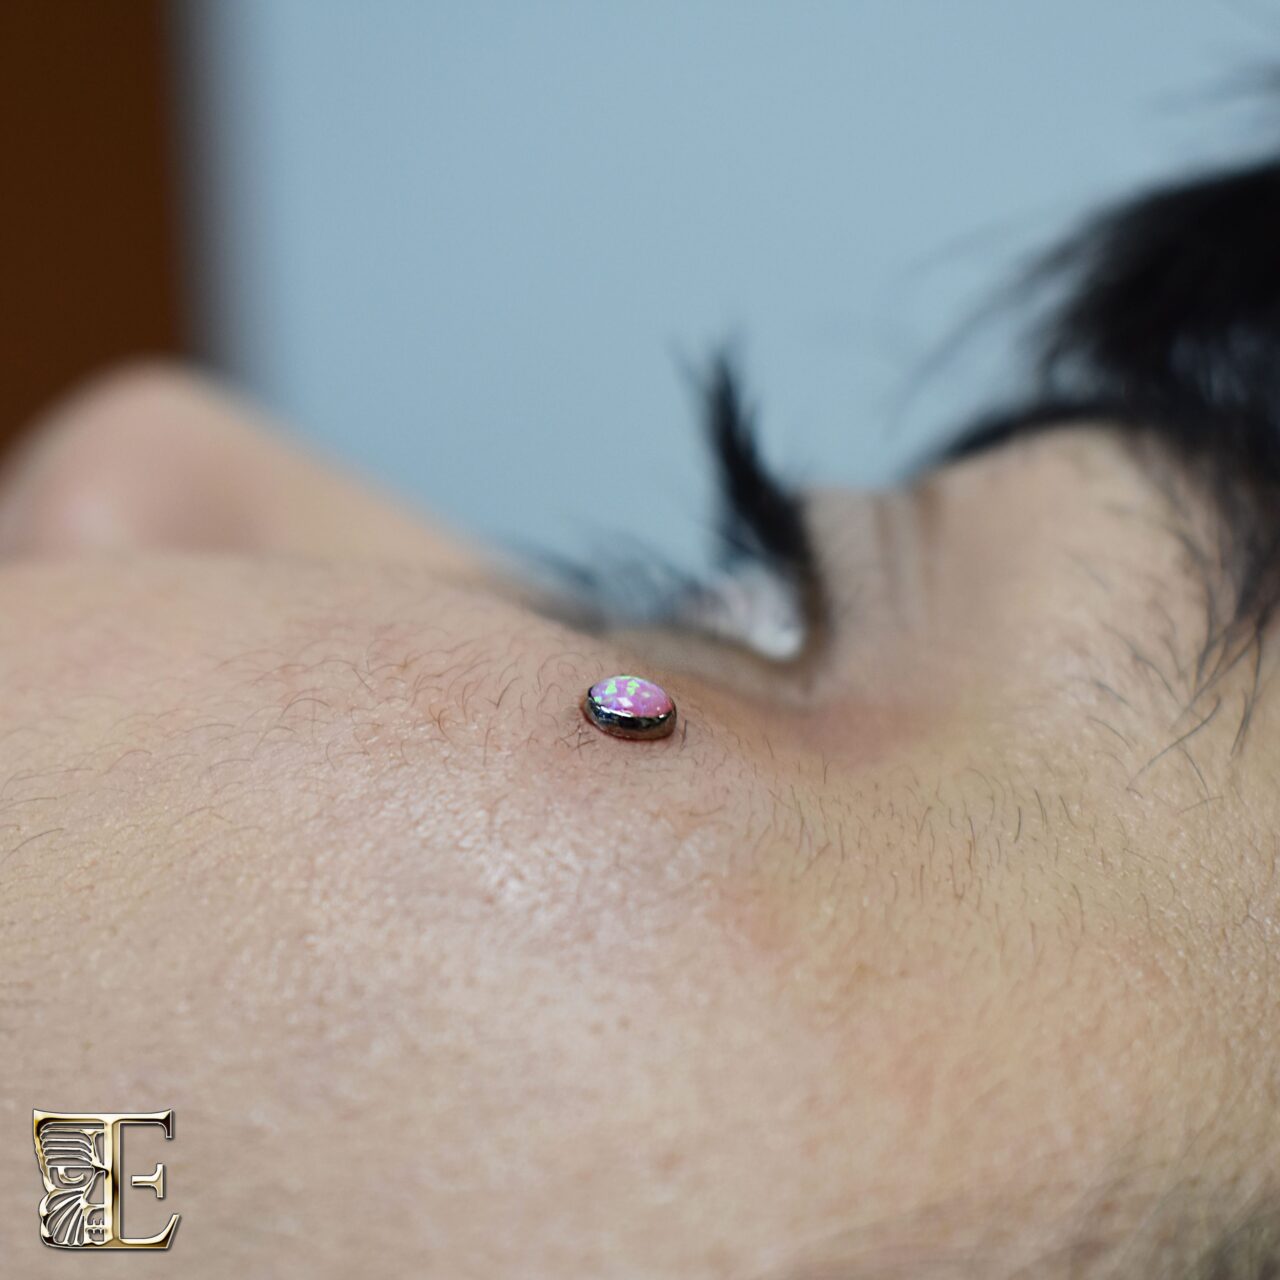 Anti-eyebrow dermal anchor with a Tribal Expression 4mm pink opal bead